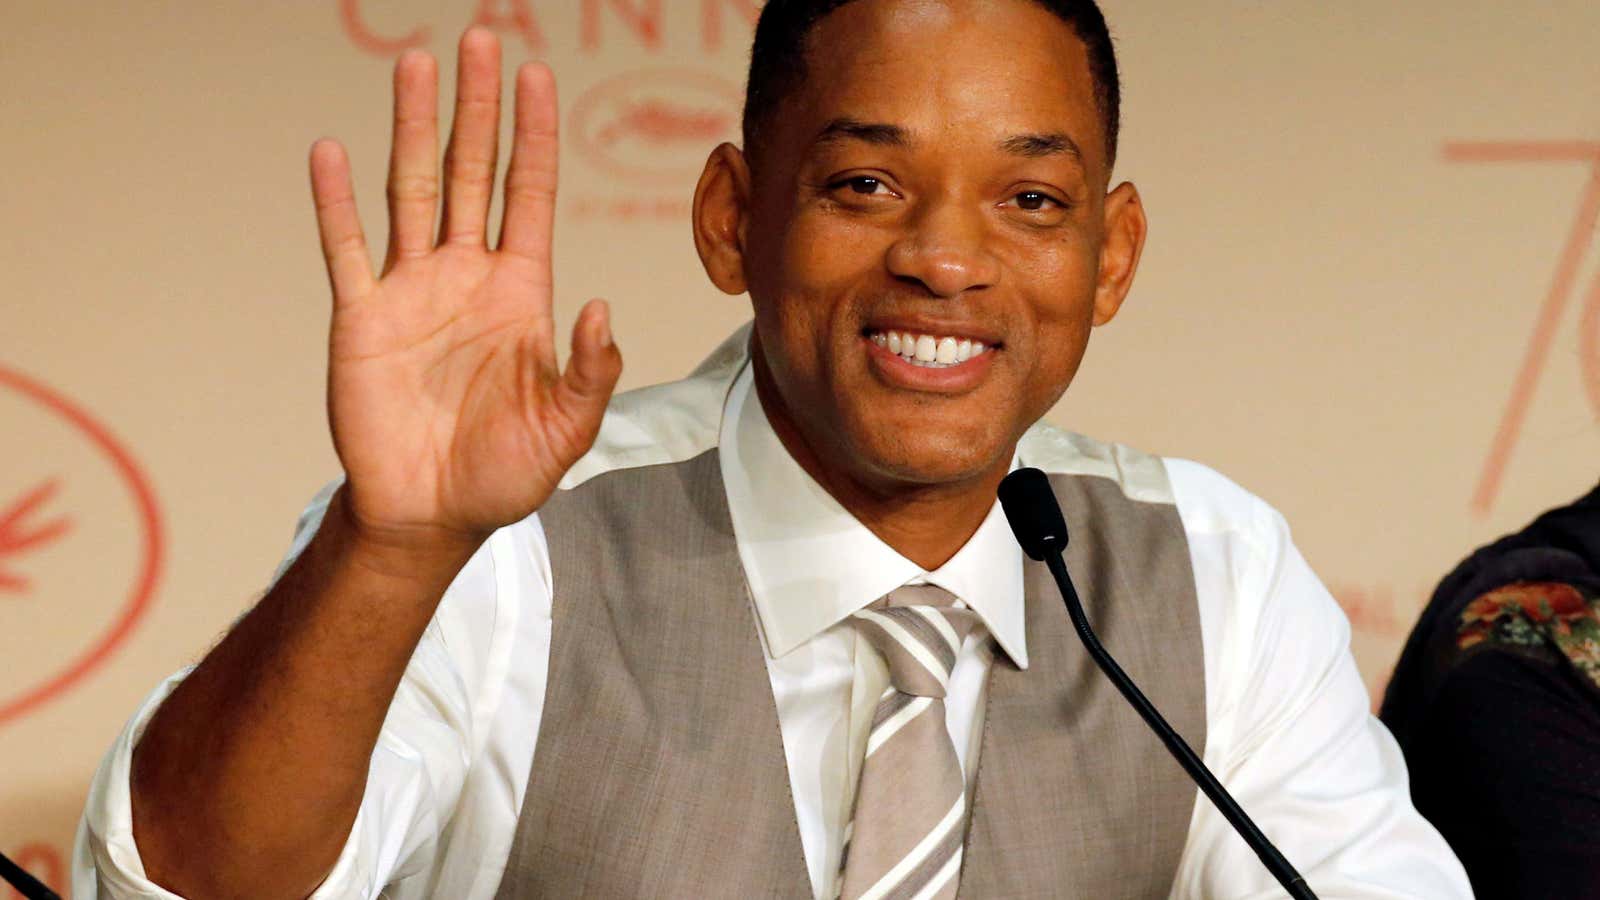 A more subdued look for Will Smith.